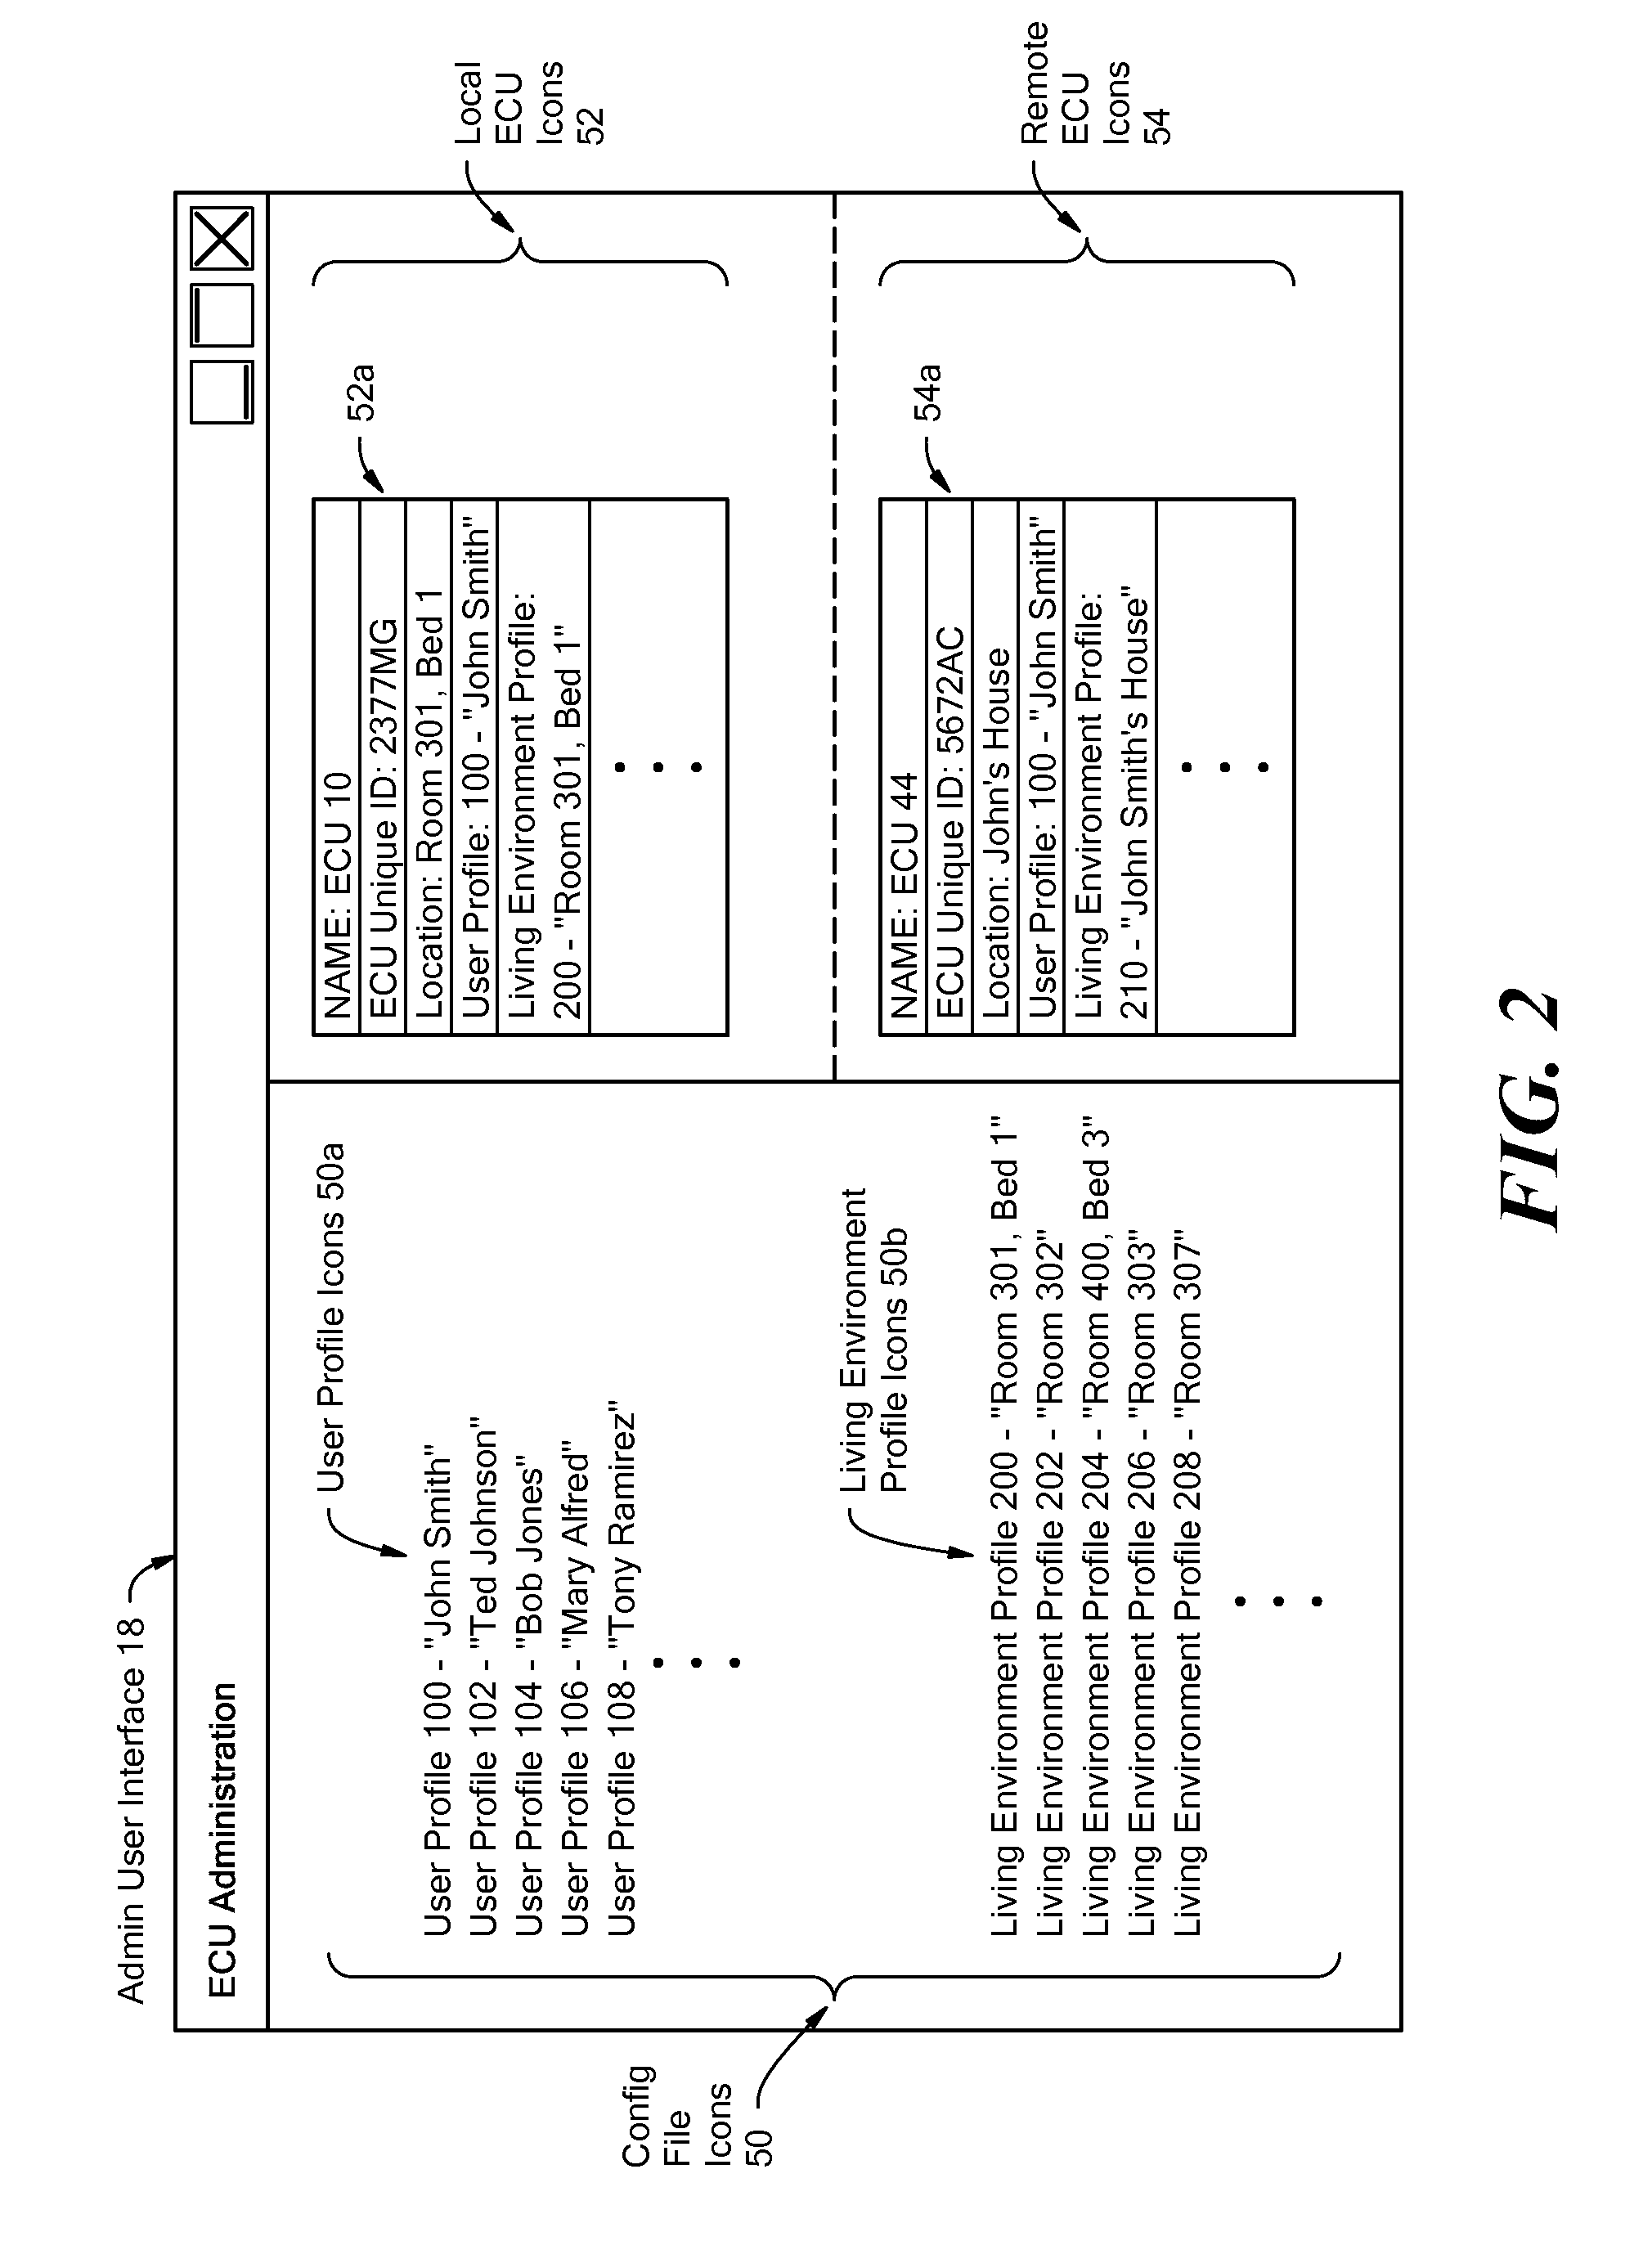 System and method for controlling a network of environmental control units